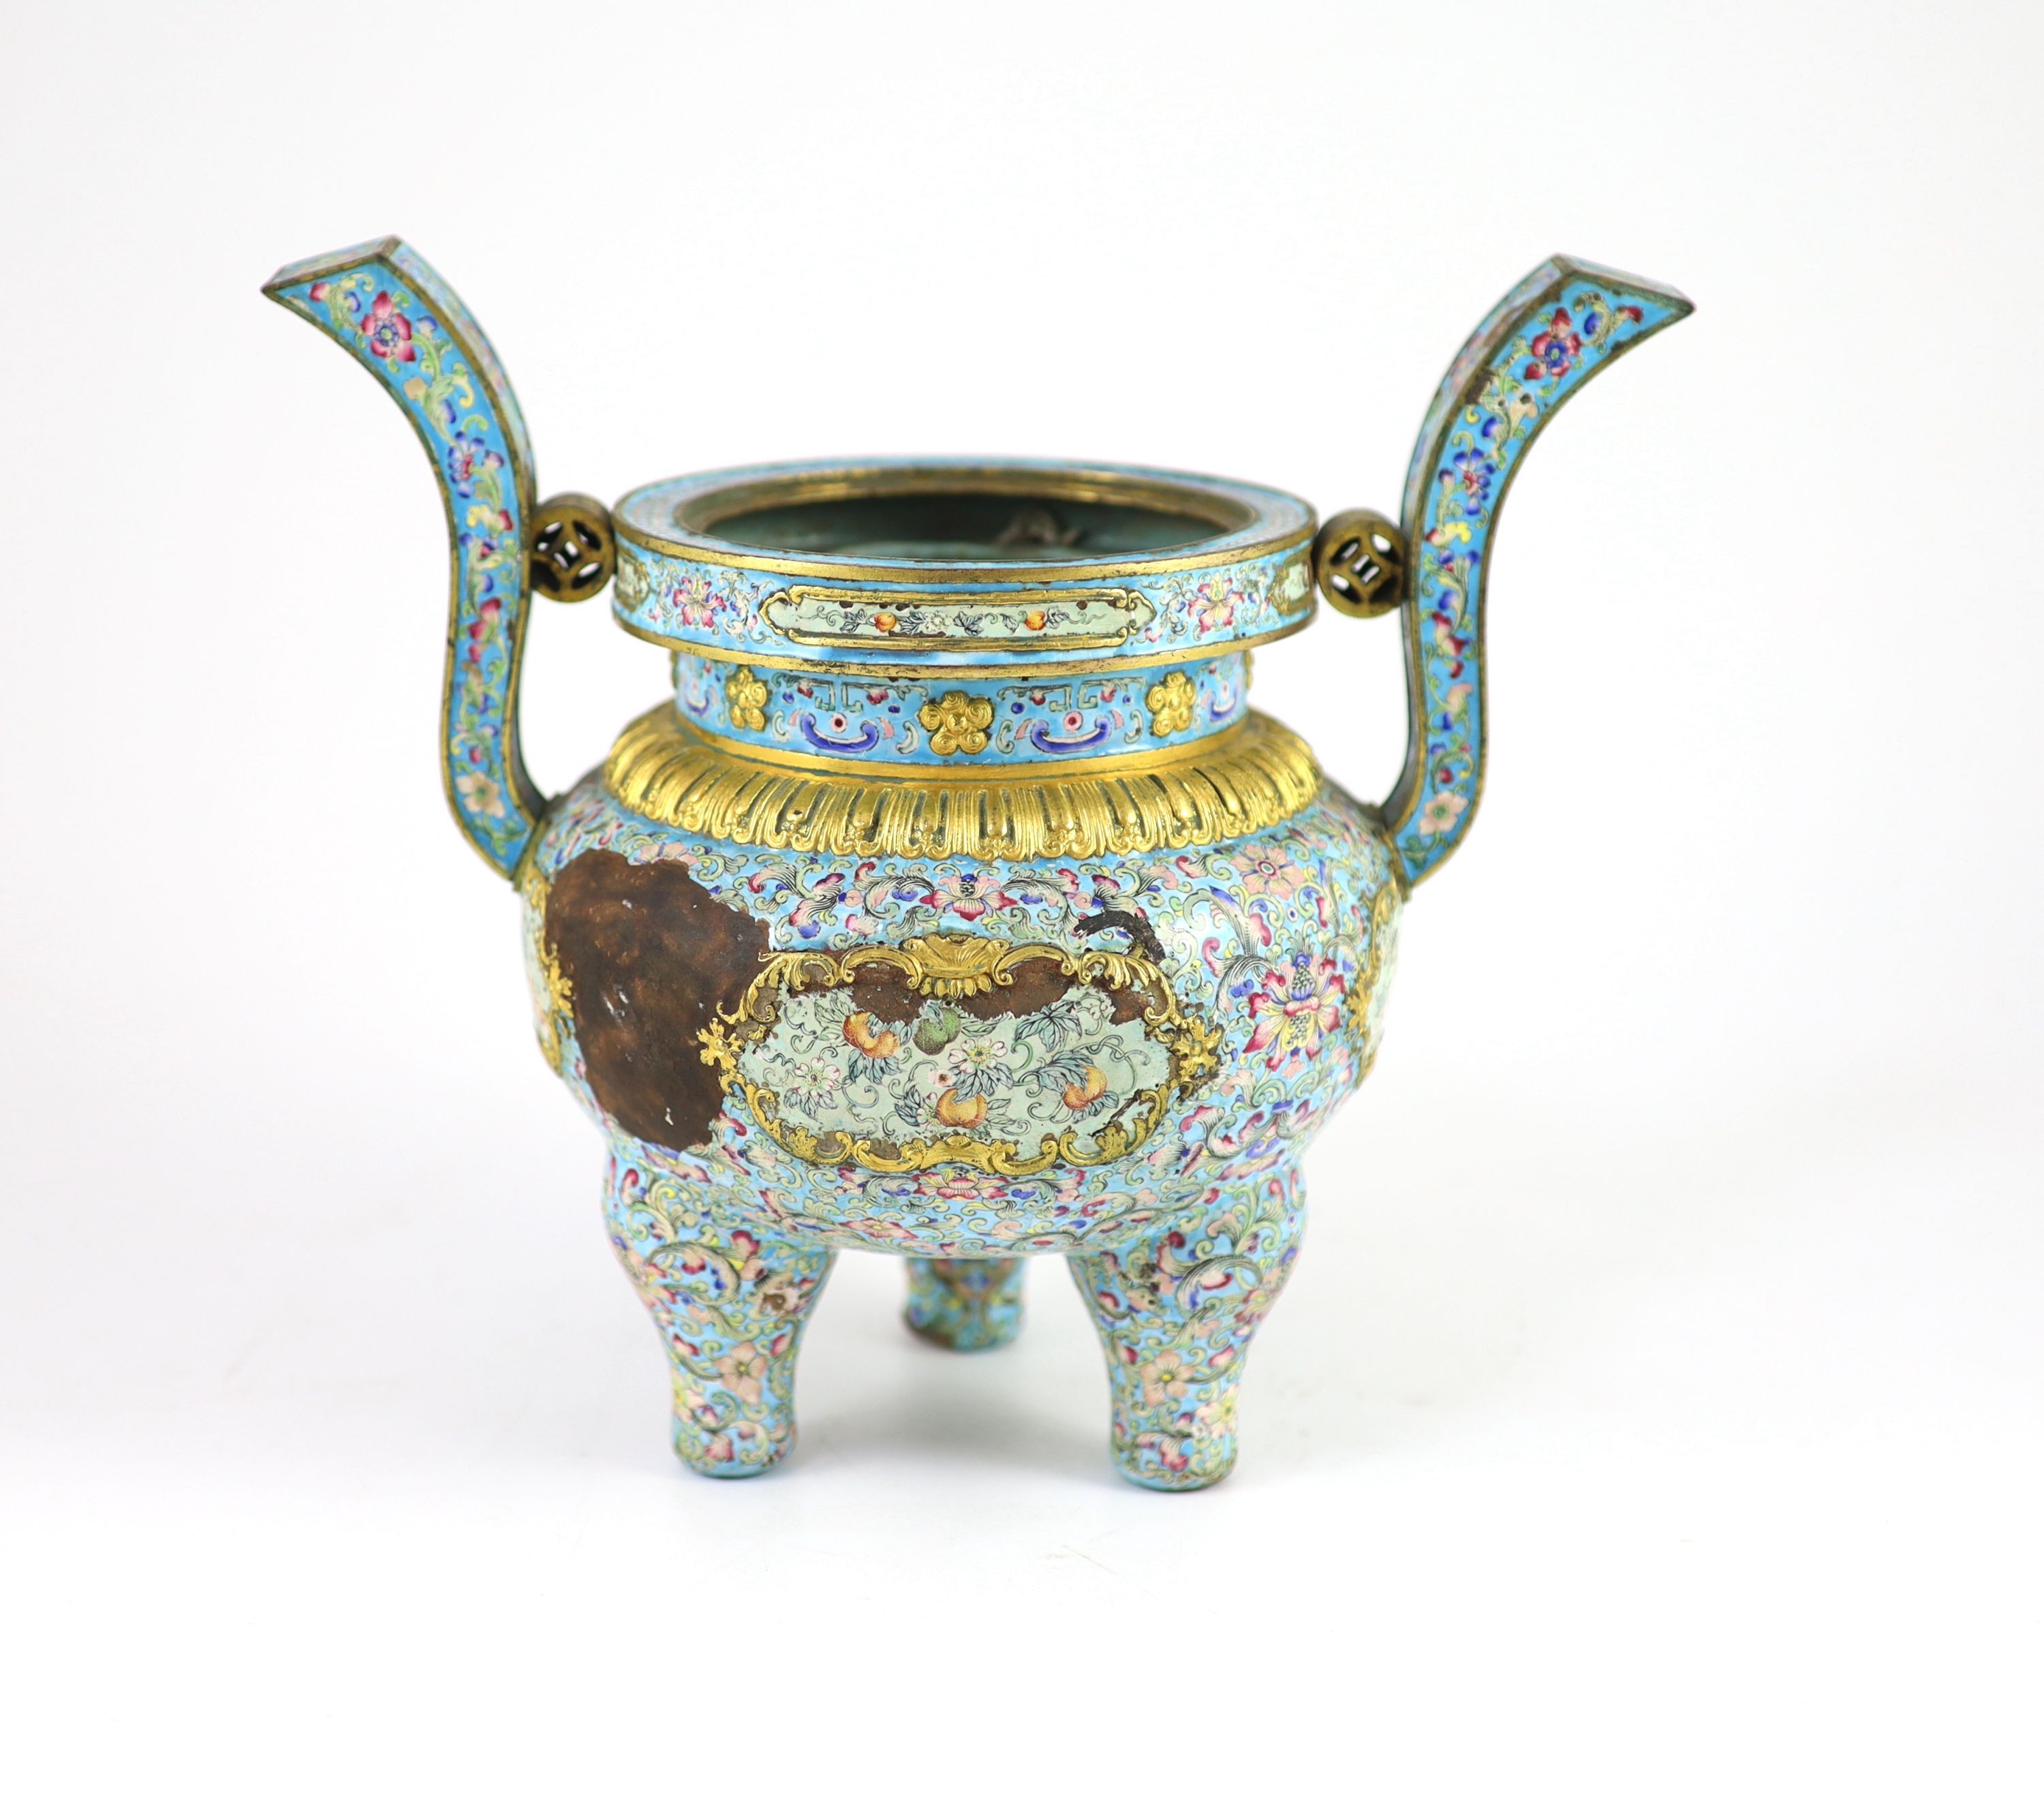 A Chinese Canton enamel tripod censer, Qianlong mark and period (1736-95), 22.5 cm high, 26 cm wide, losses to enamels